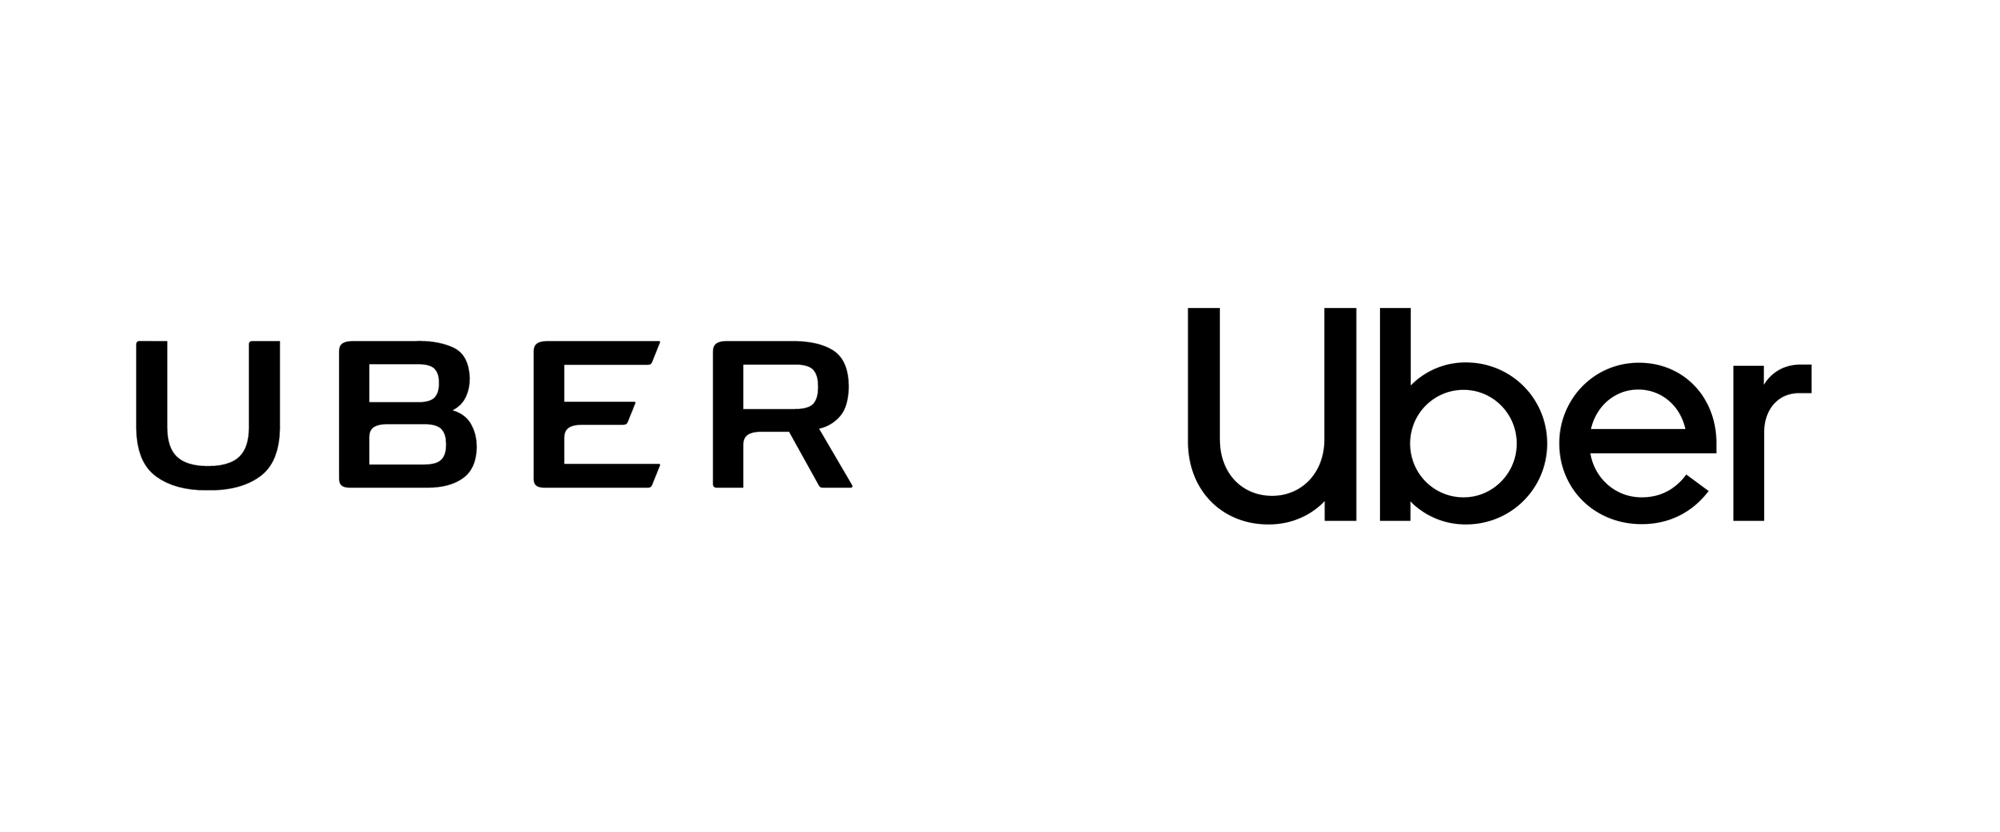 Uber Logo - Brand New: New Logo And Identity For Uber By Wolff Olins And In House